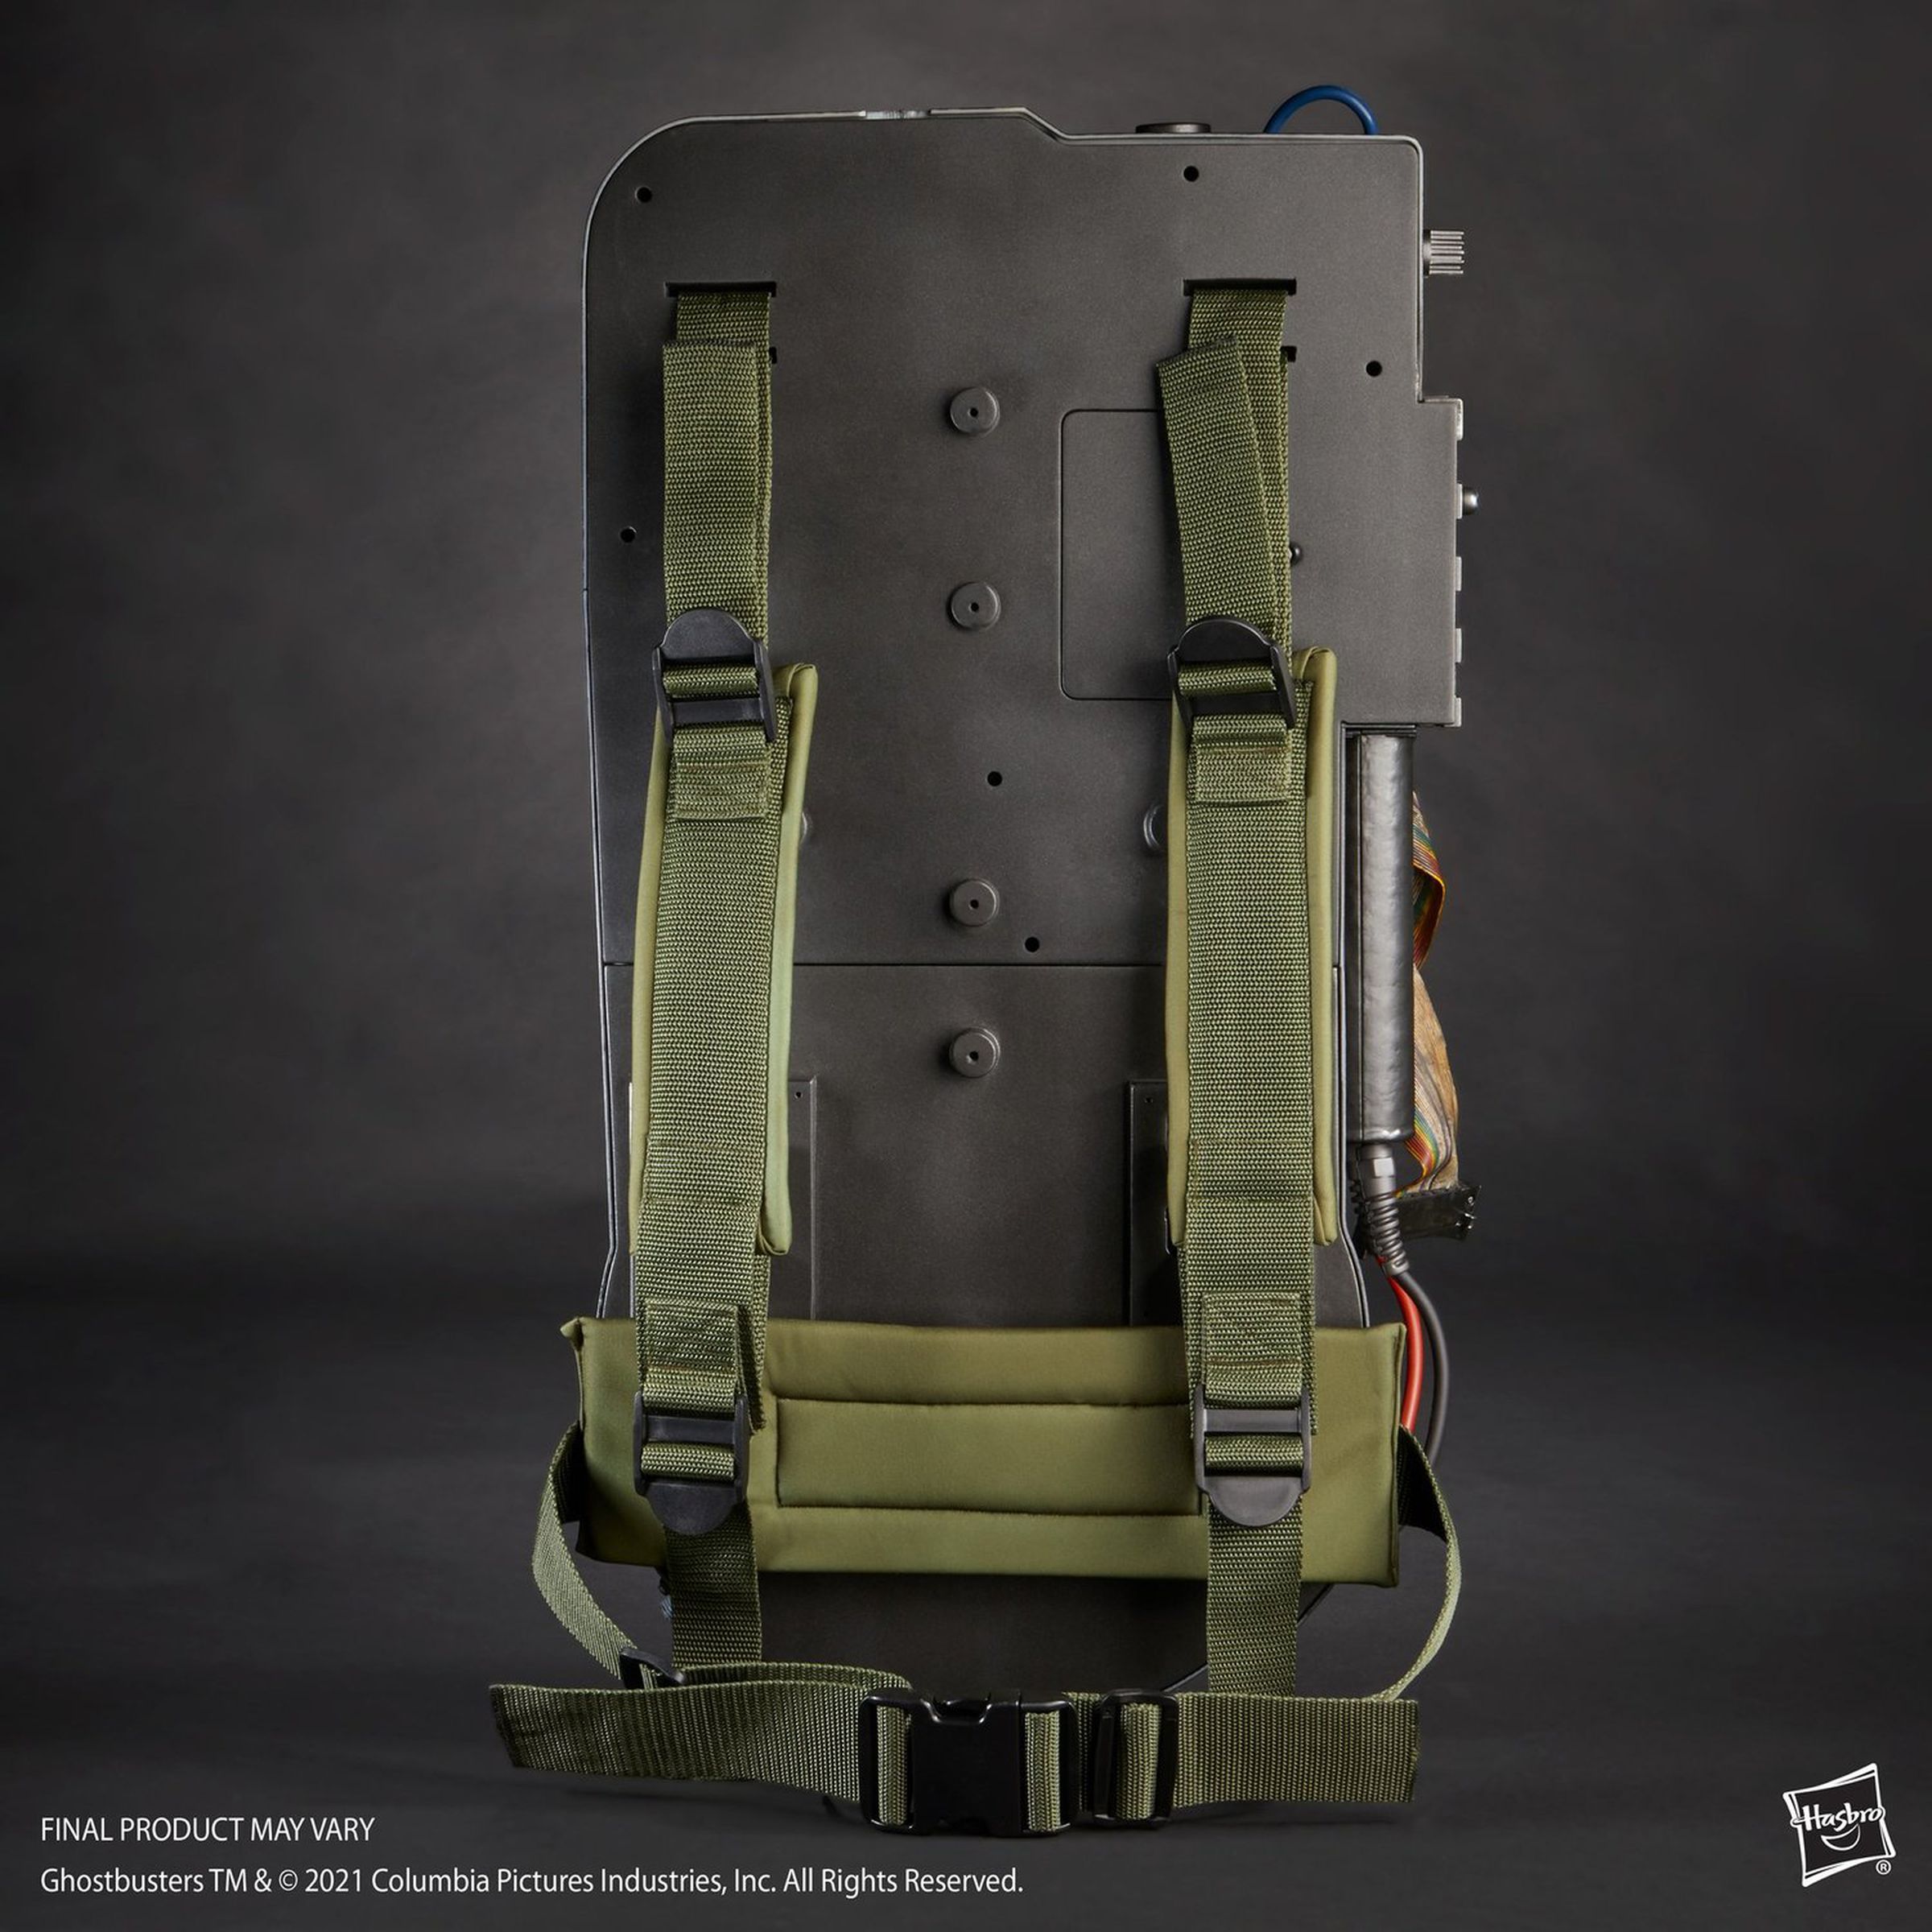 Tactical shoulder and belt straps plus what looks like a lumbar pad.